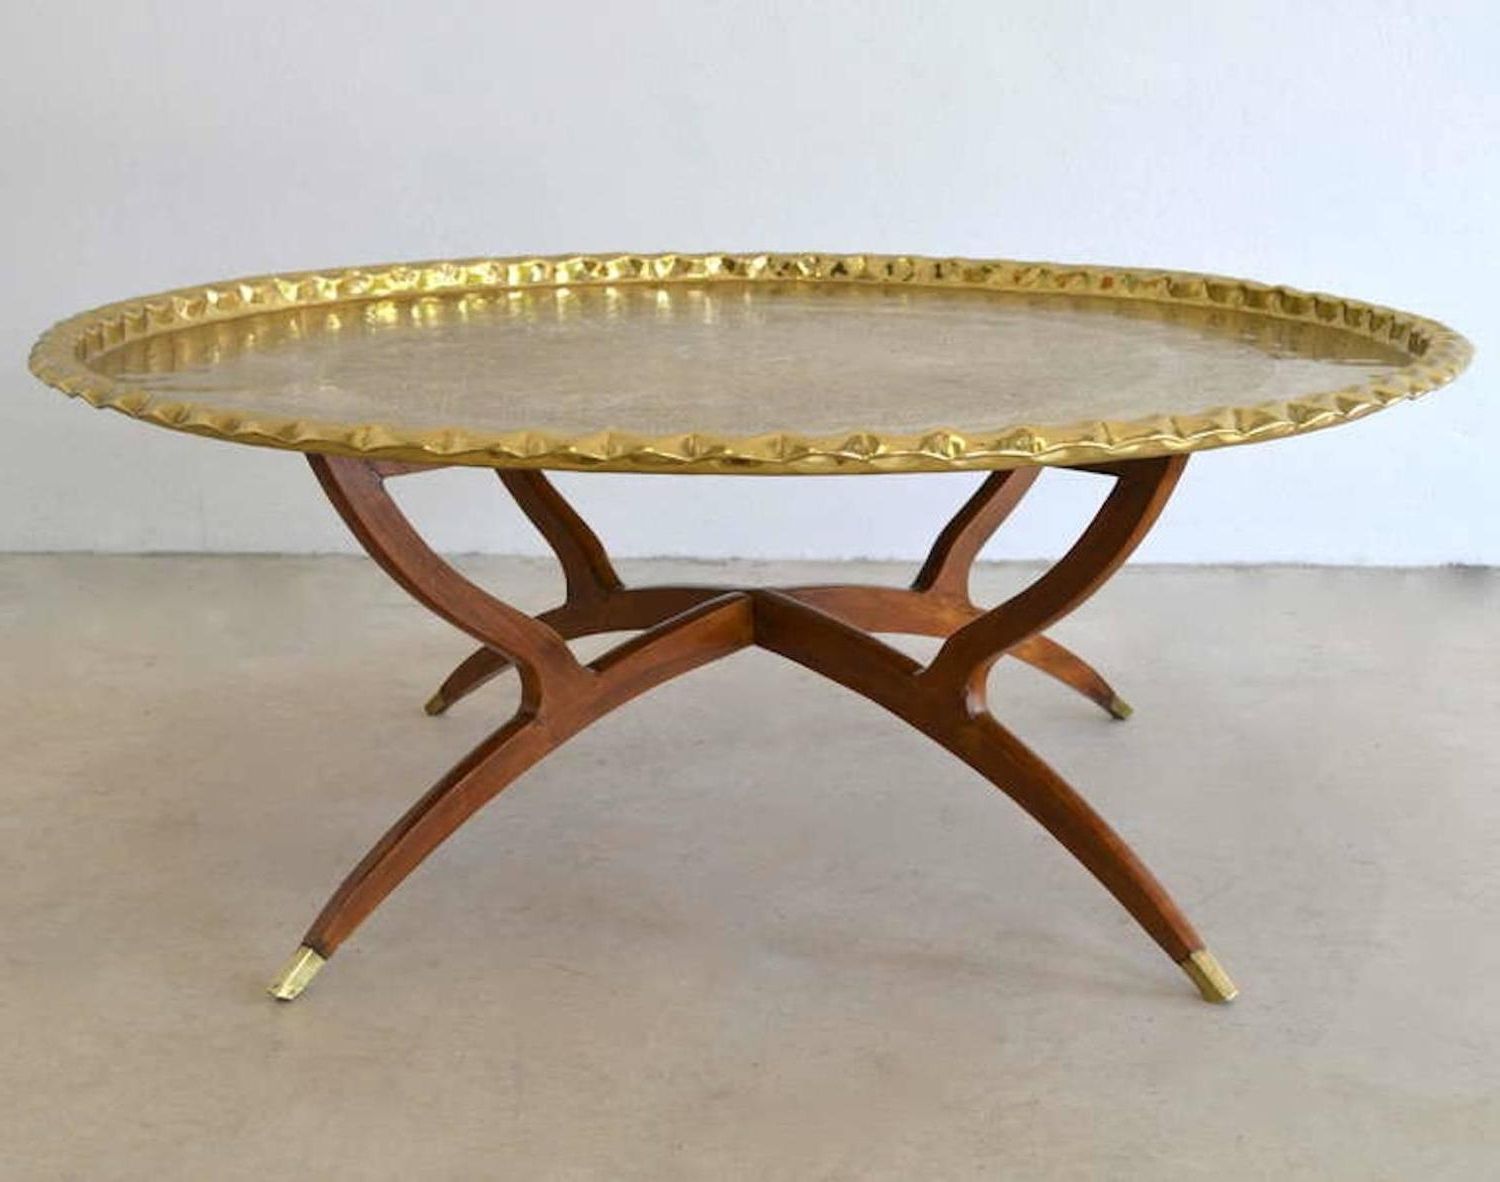 Most Recent Antique Brass Aluminum Round Coffee Tables Within Mid Century Round Brass Tray Top Coffee Table For Sale At (Gallery 2 of 20)